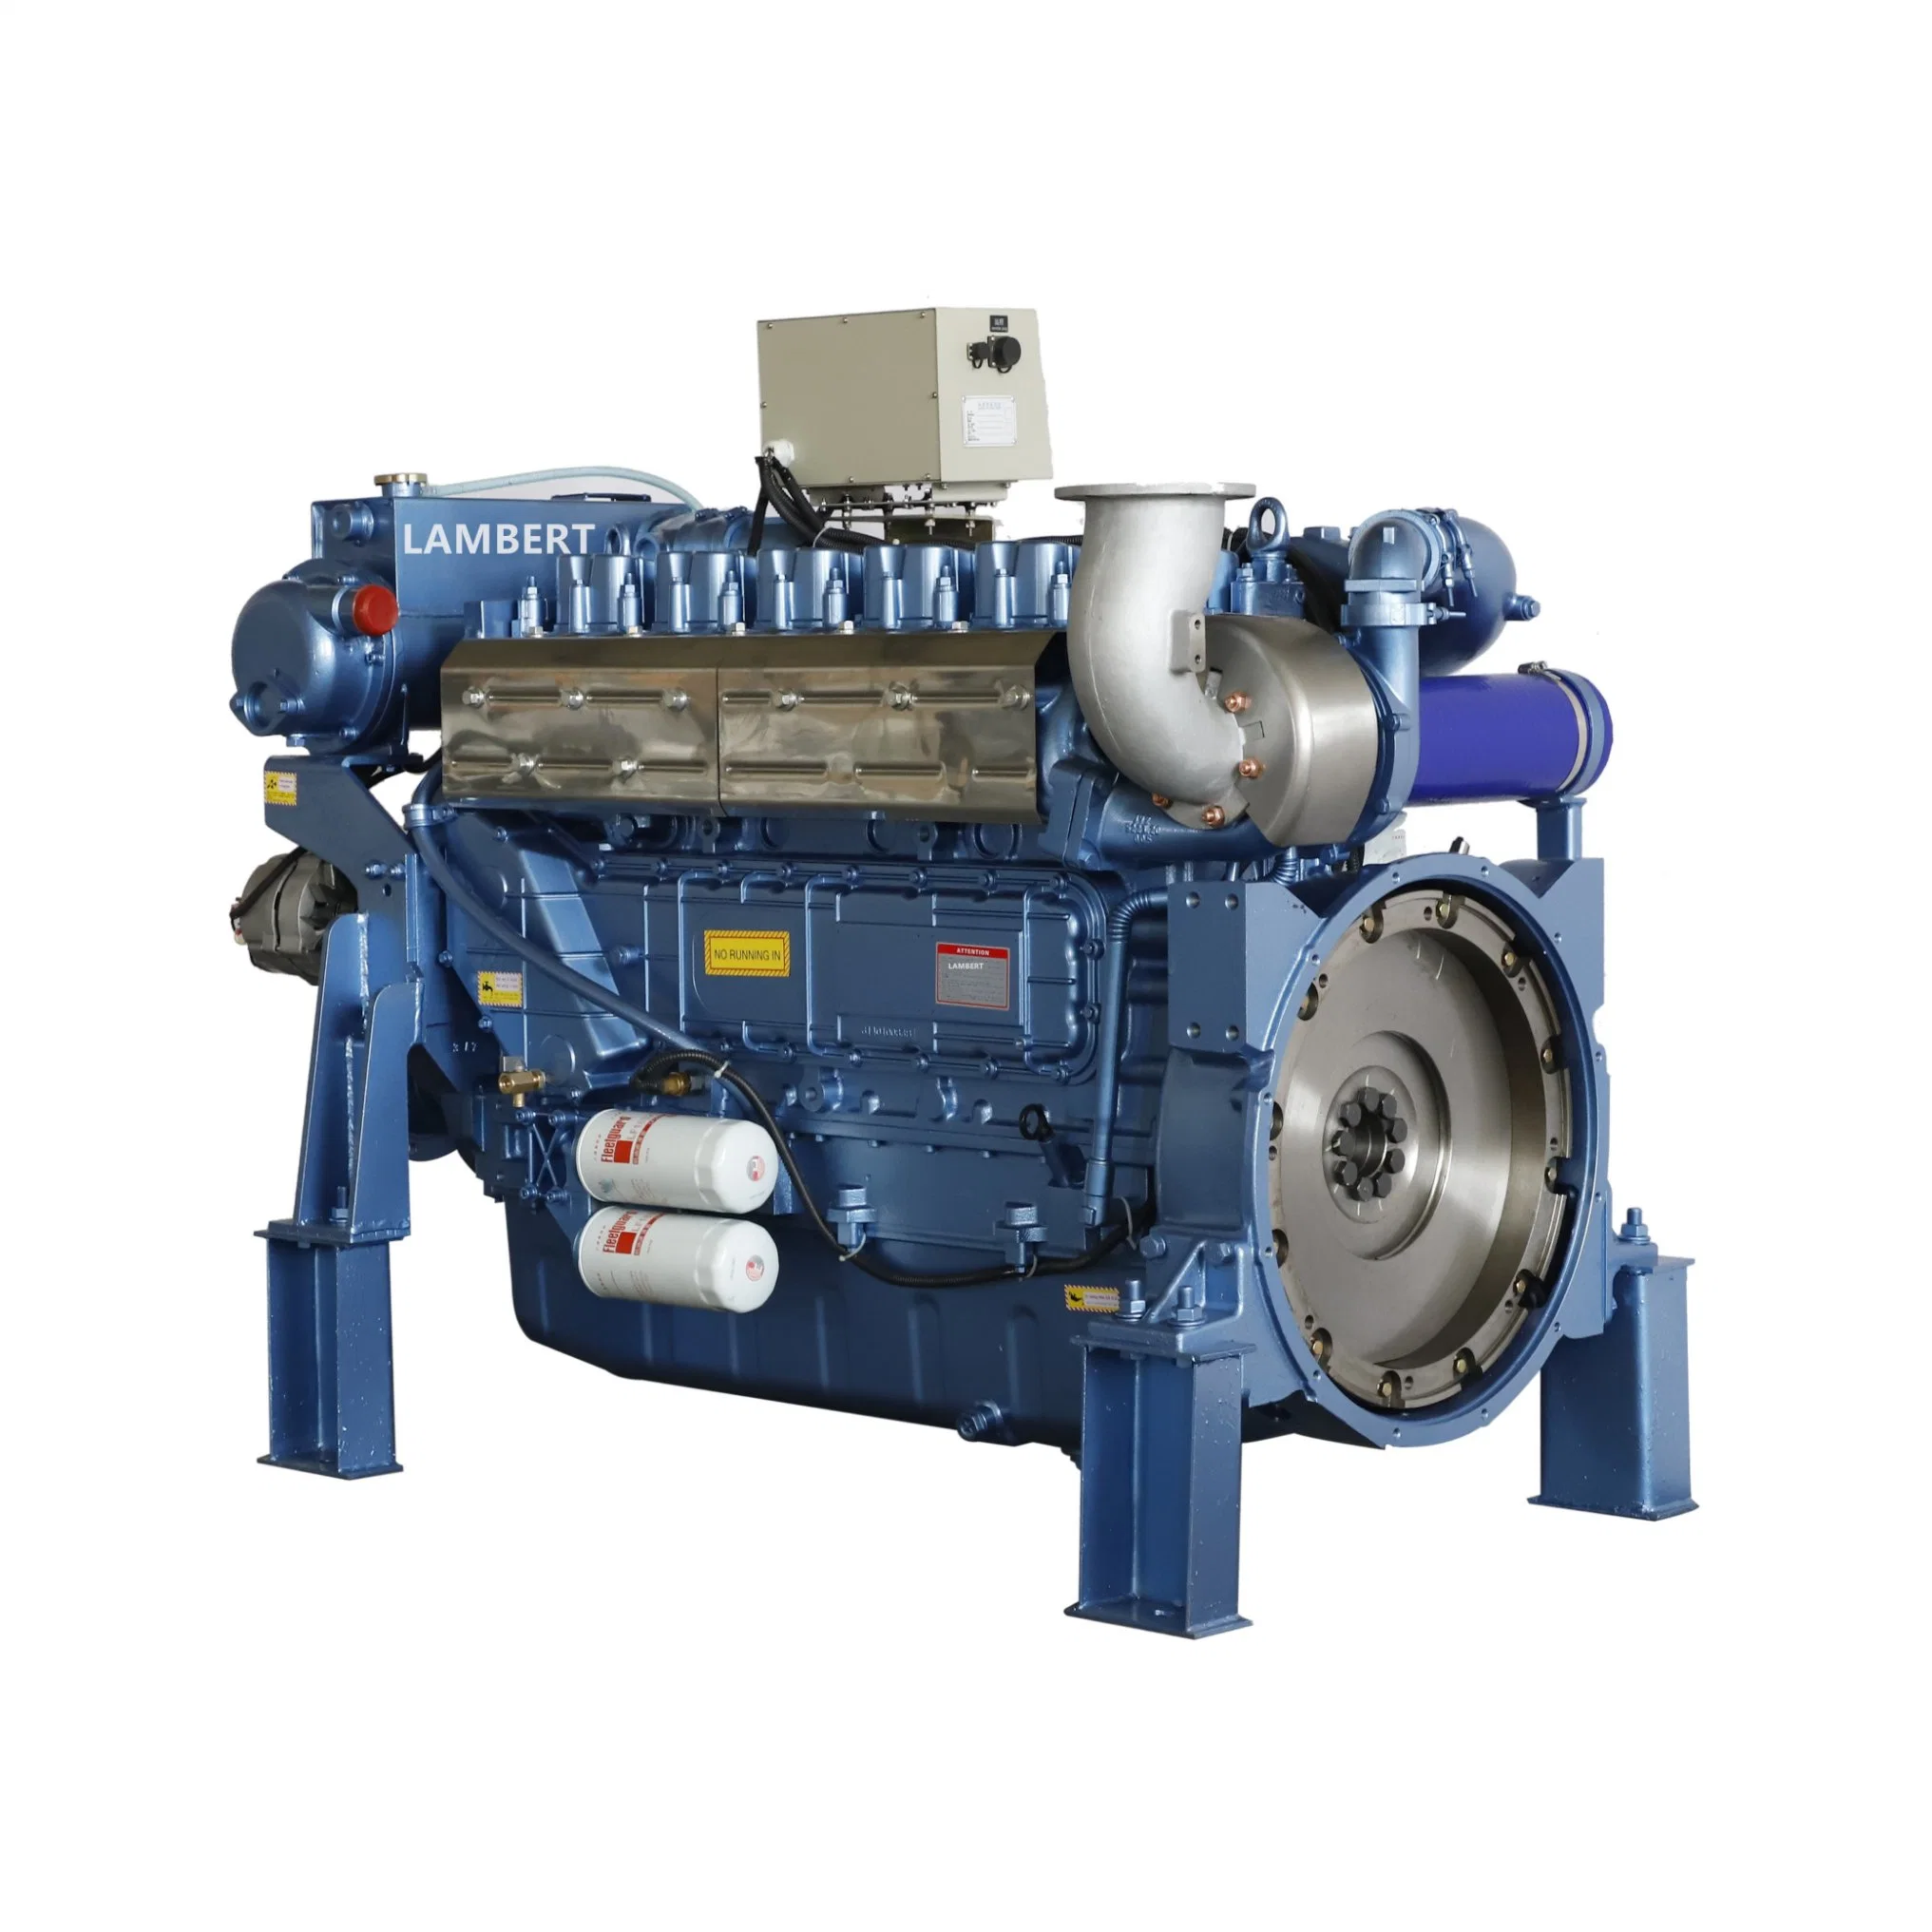 Factory Price Original and Hot Sale 6 Cylinders Water-Cooled Boat/Ship Marine Diesel Engine